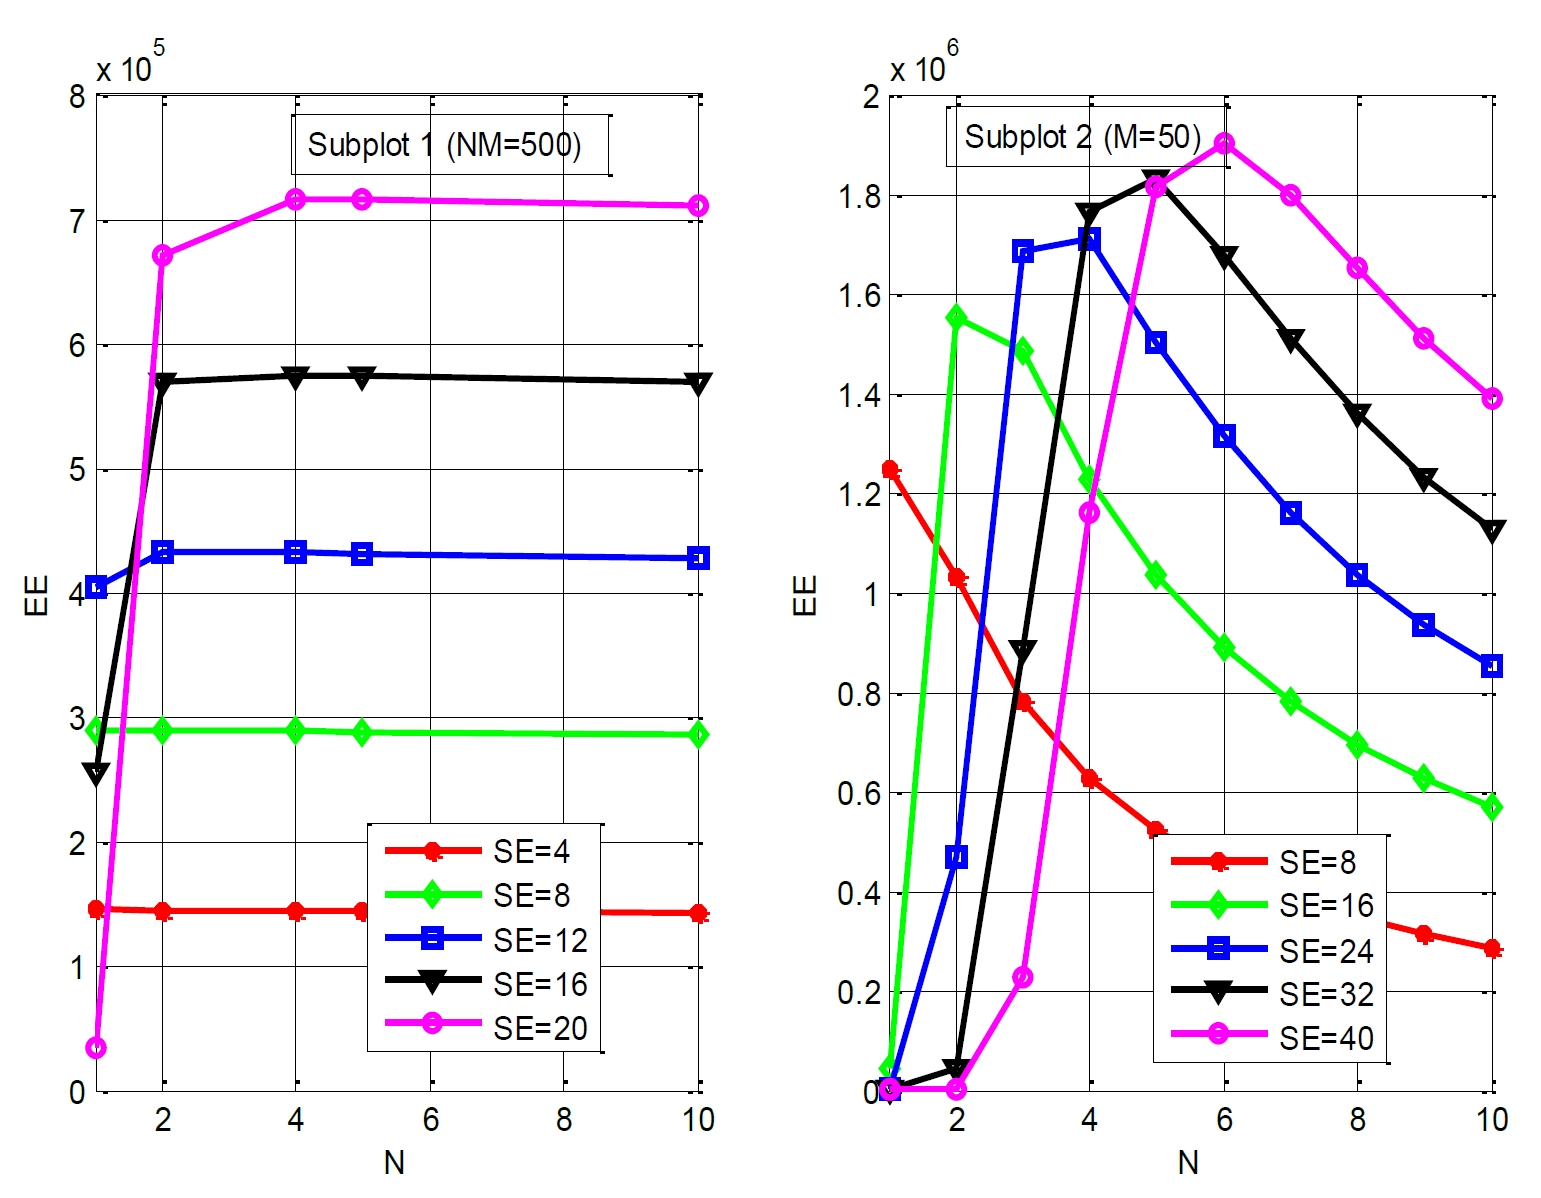 Fig.5. N vs. EE with different SE values